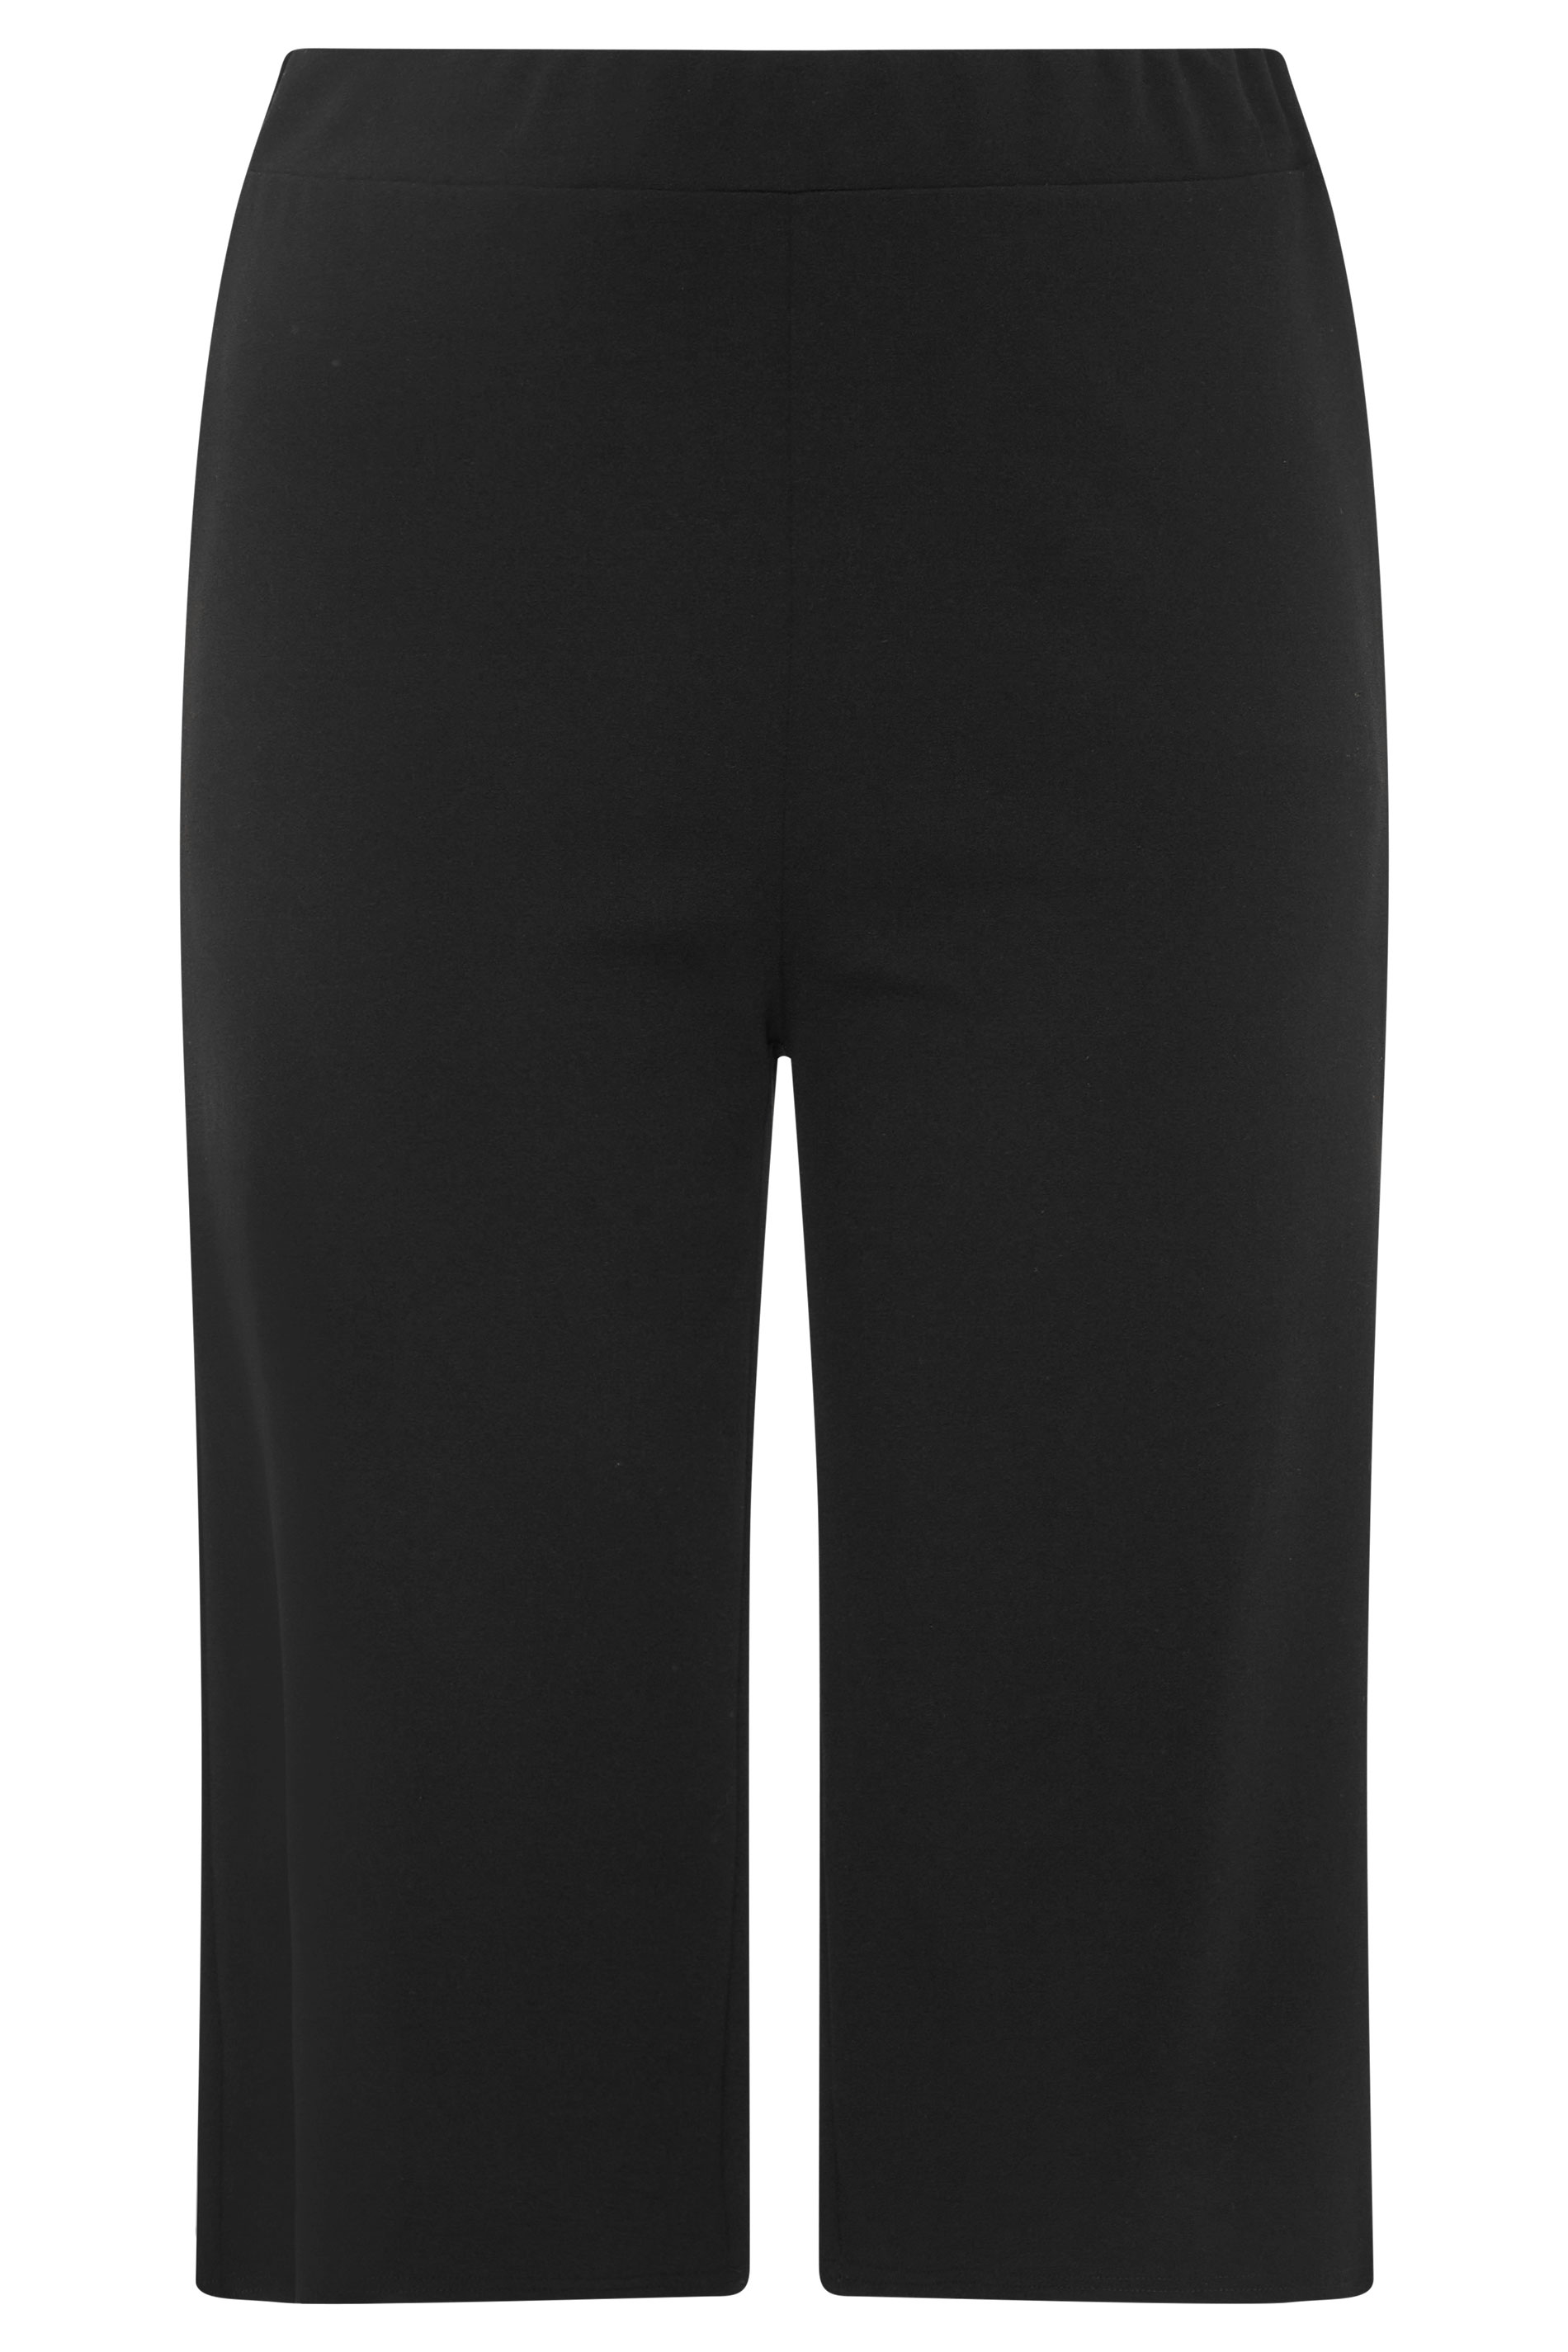 YOURS LONDON Black Wide Leg Culottes | Yours Clothing